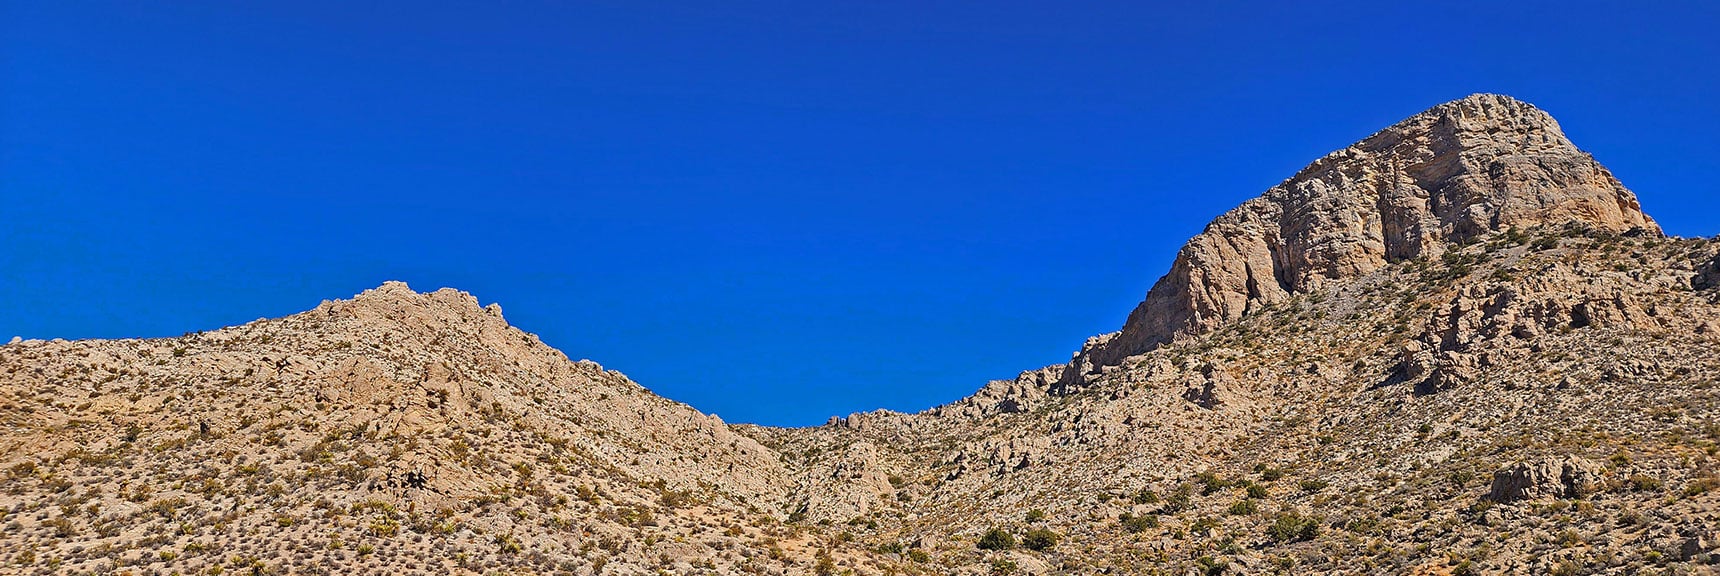 Main Trail in Gully (Center); Alternate Ascent Route Up Left Ridgeline | Turtlehead Peak | Red Rock Canyon National Conservation Area, Nevada